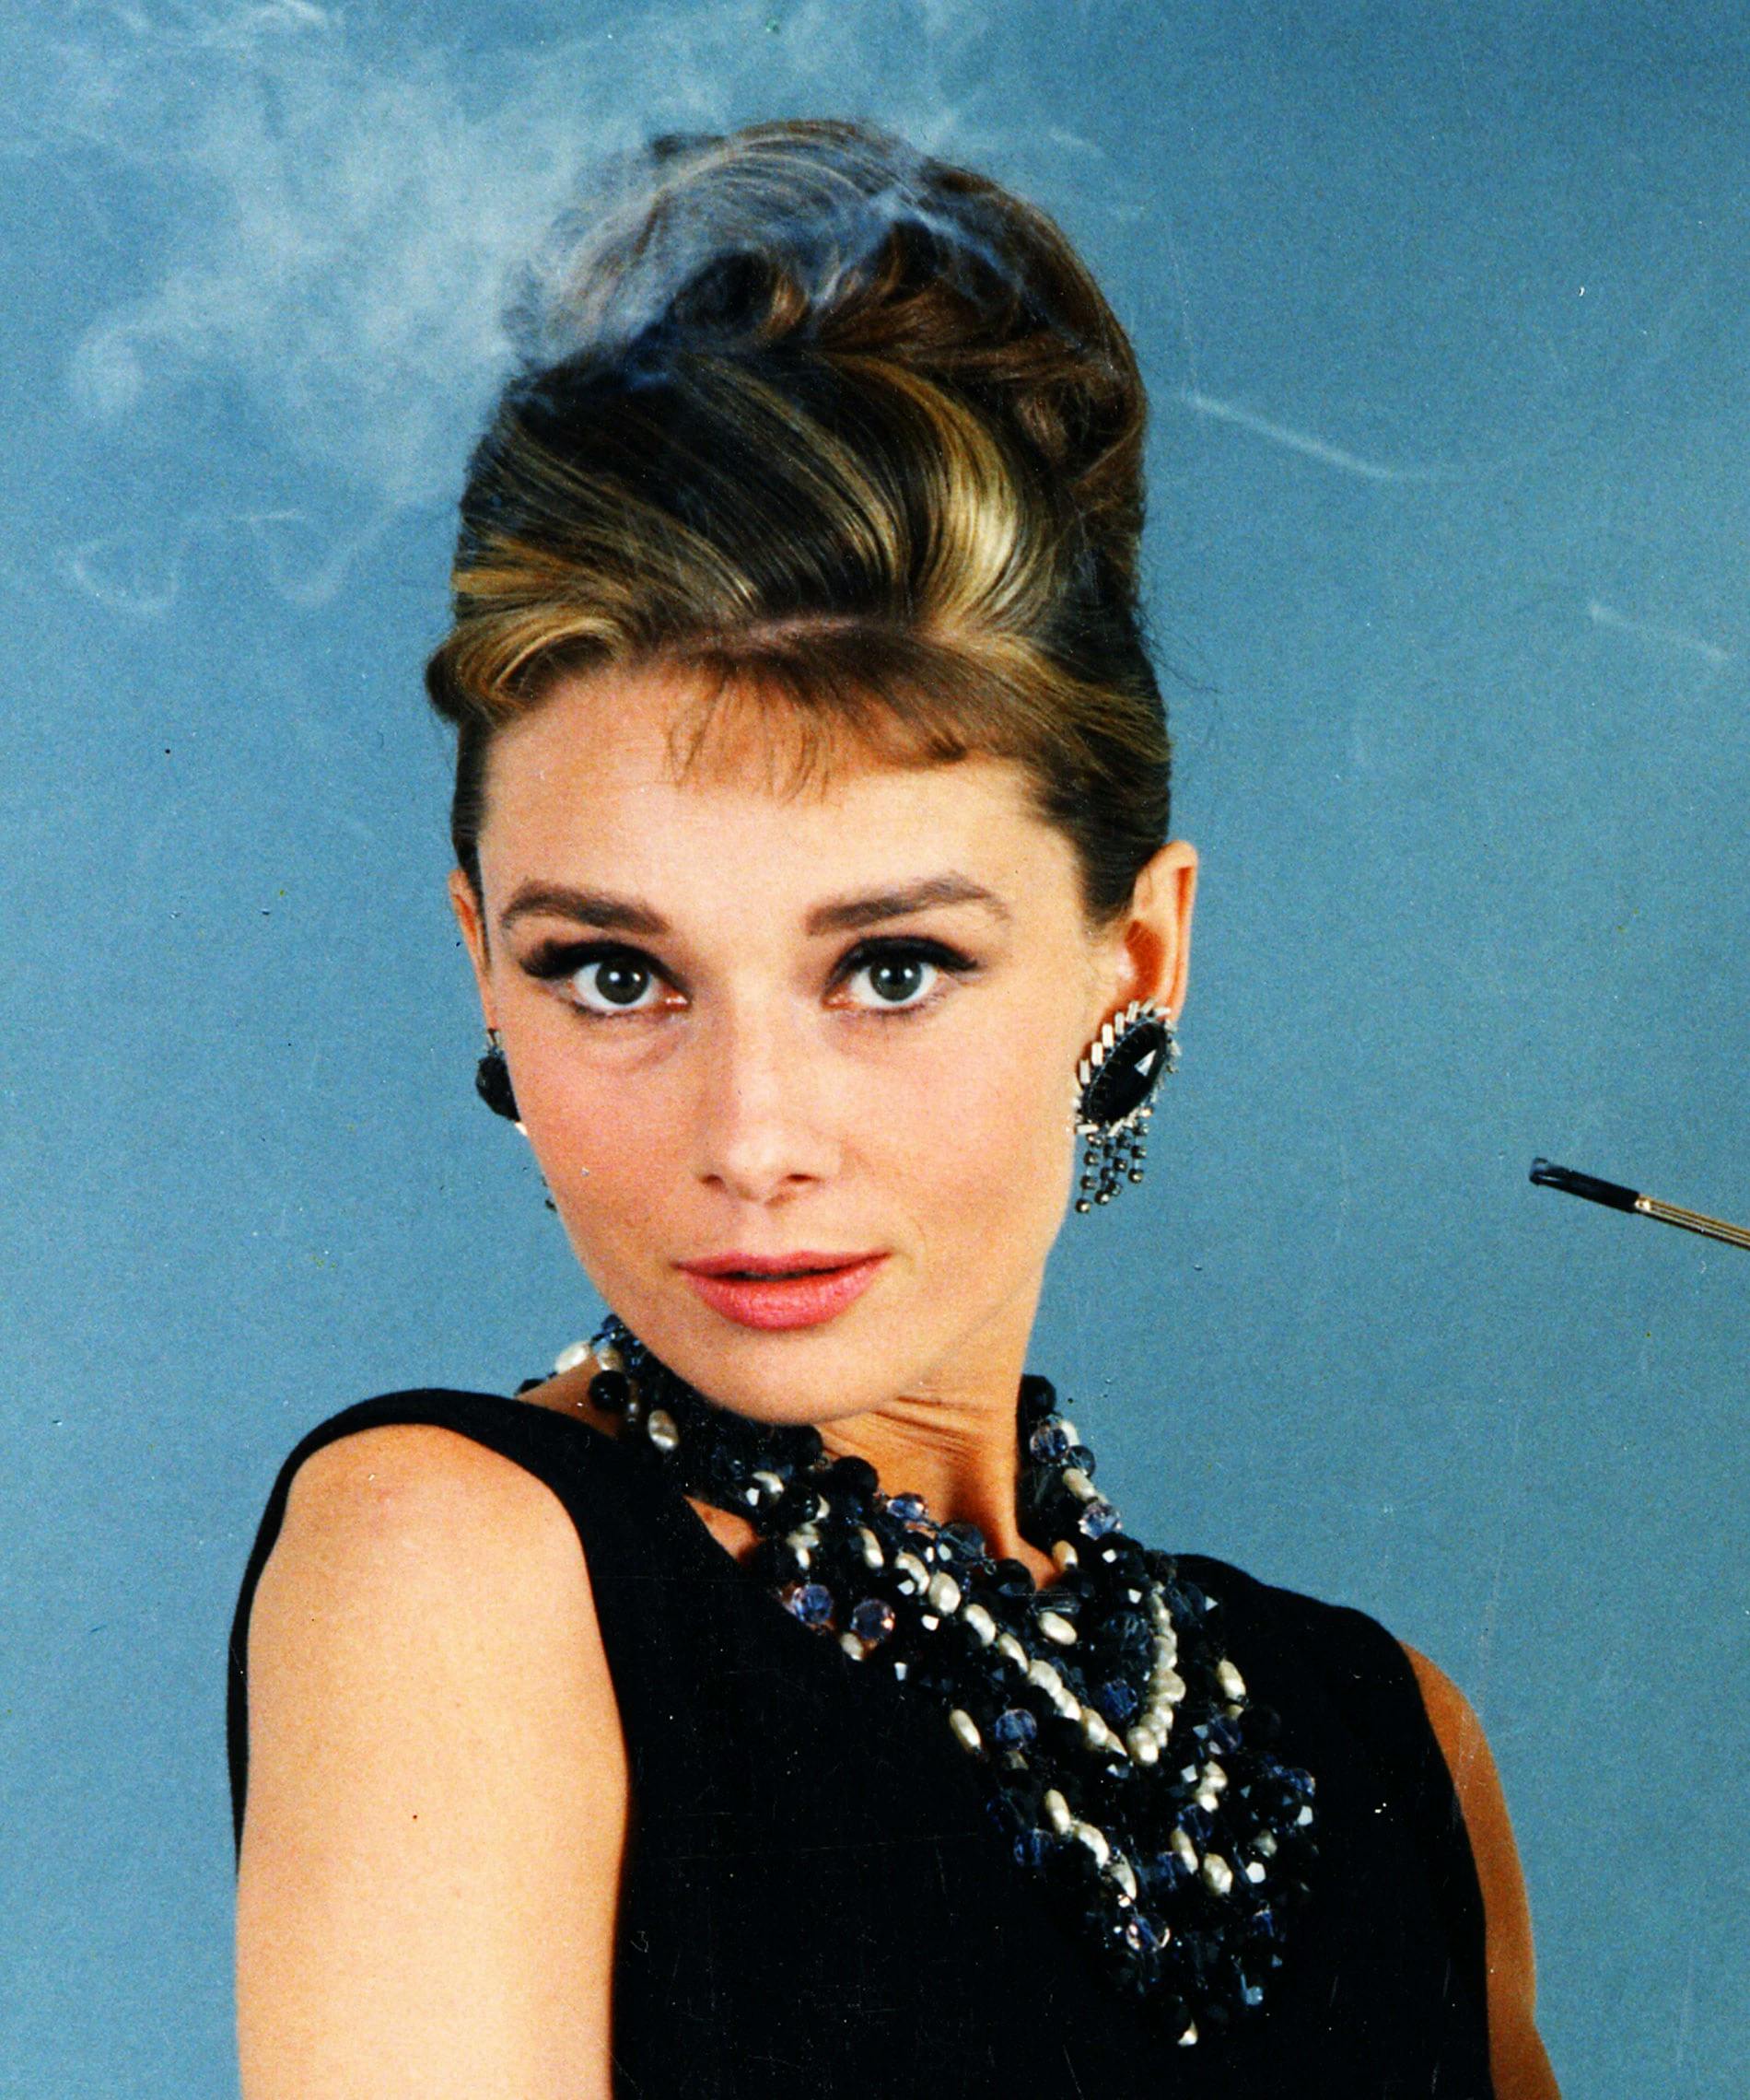 10 Dupes For Audrey’s Iconic “Breakfast At Tiffany’s” Lip Color